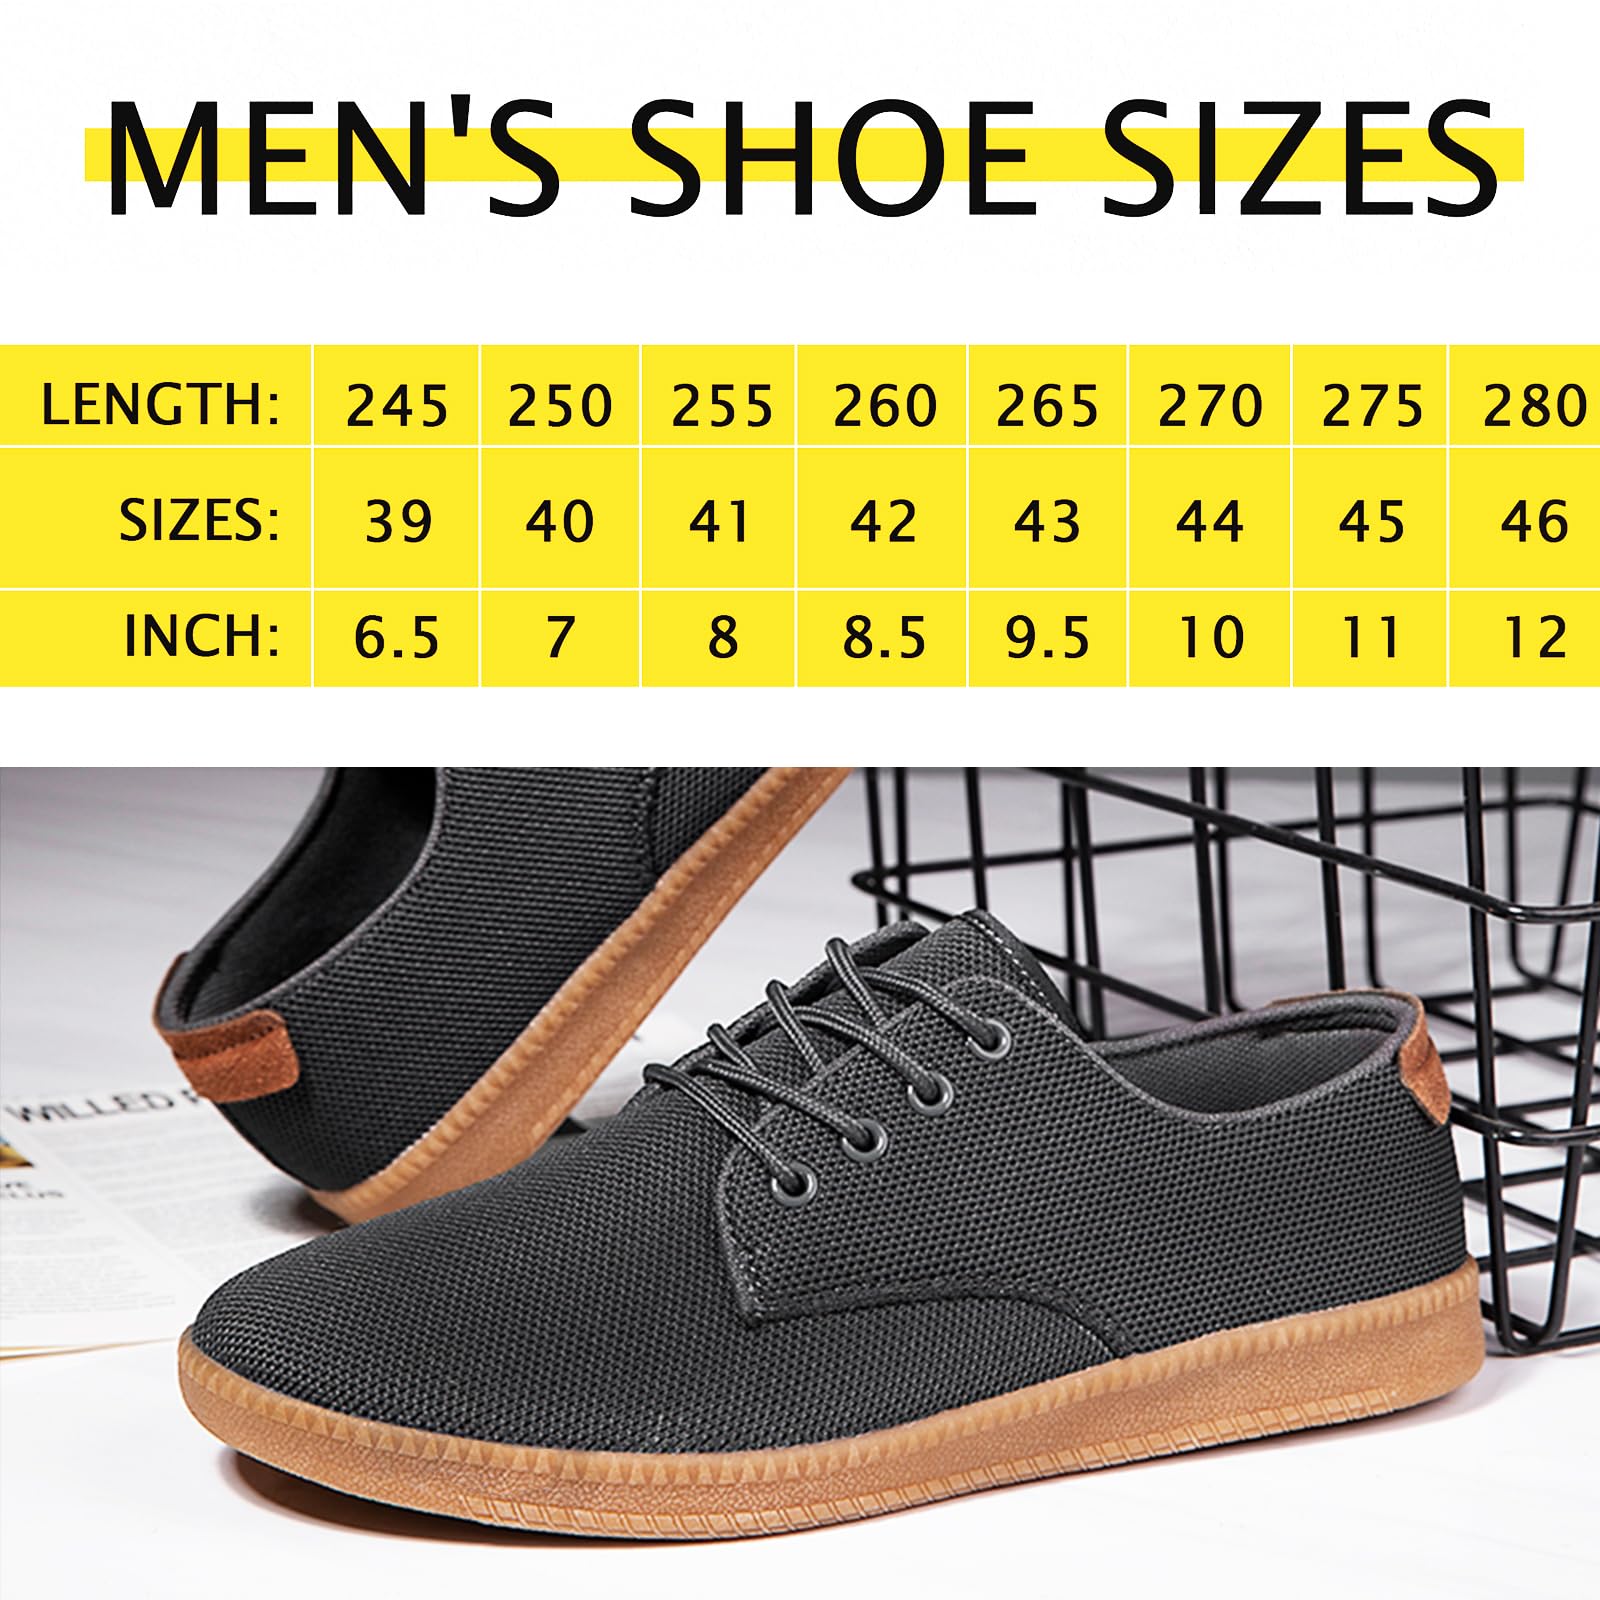 Mens Dress Shoes Sneakers Mesh Oxfords Grey Business Comfort Breathable Loafers Size 11 Casual Minimalist Workout Tennis Flat